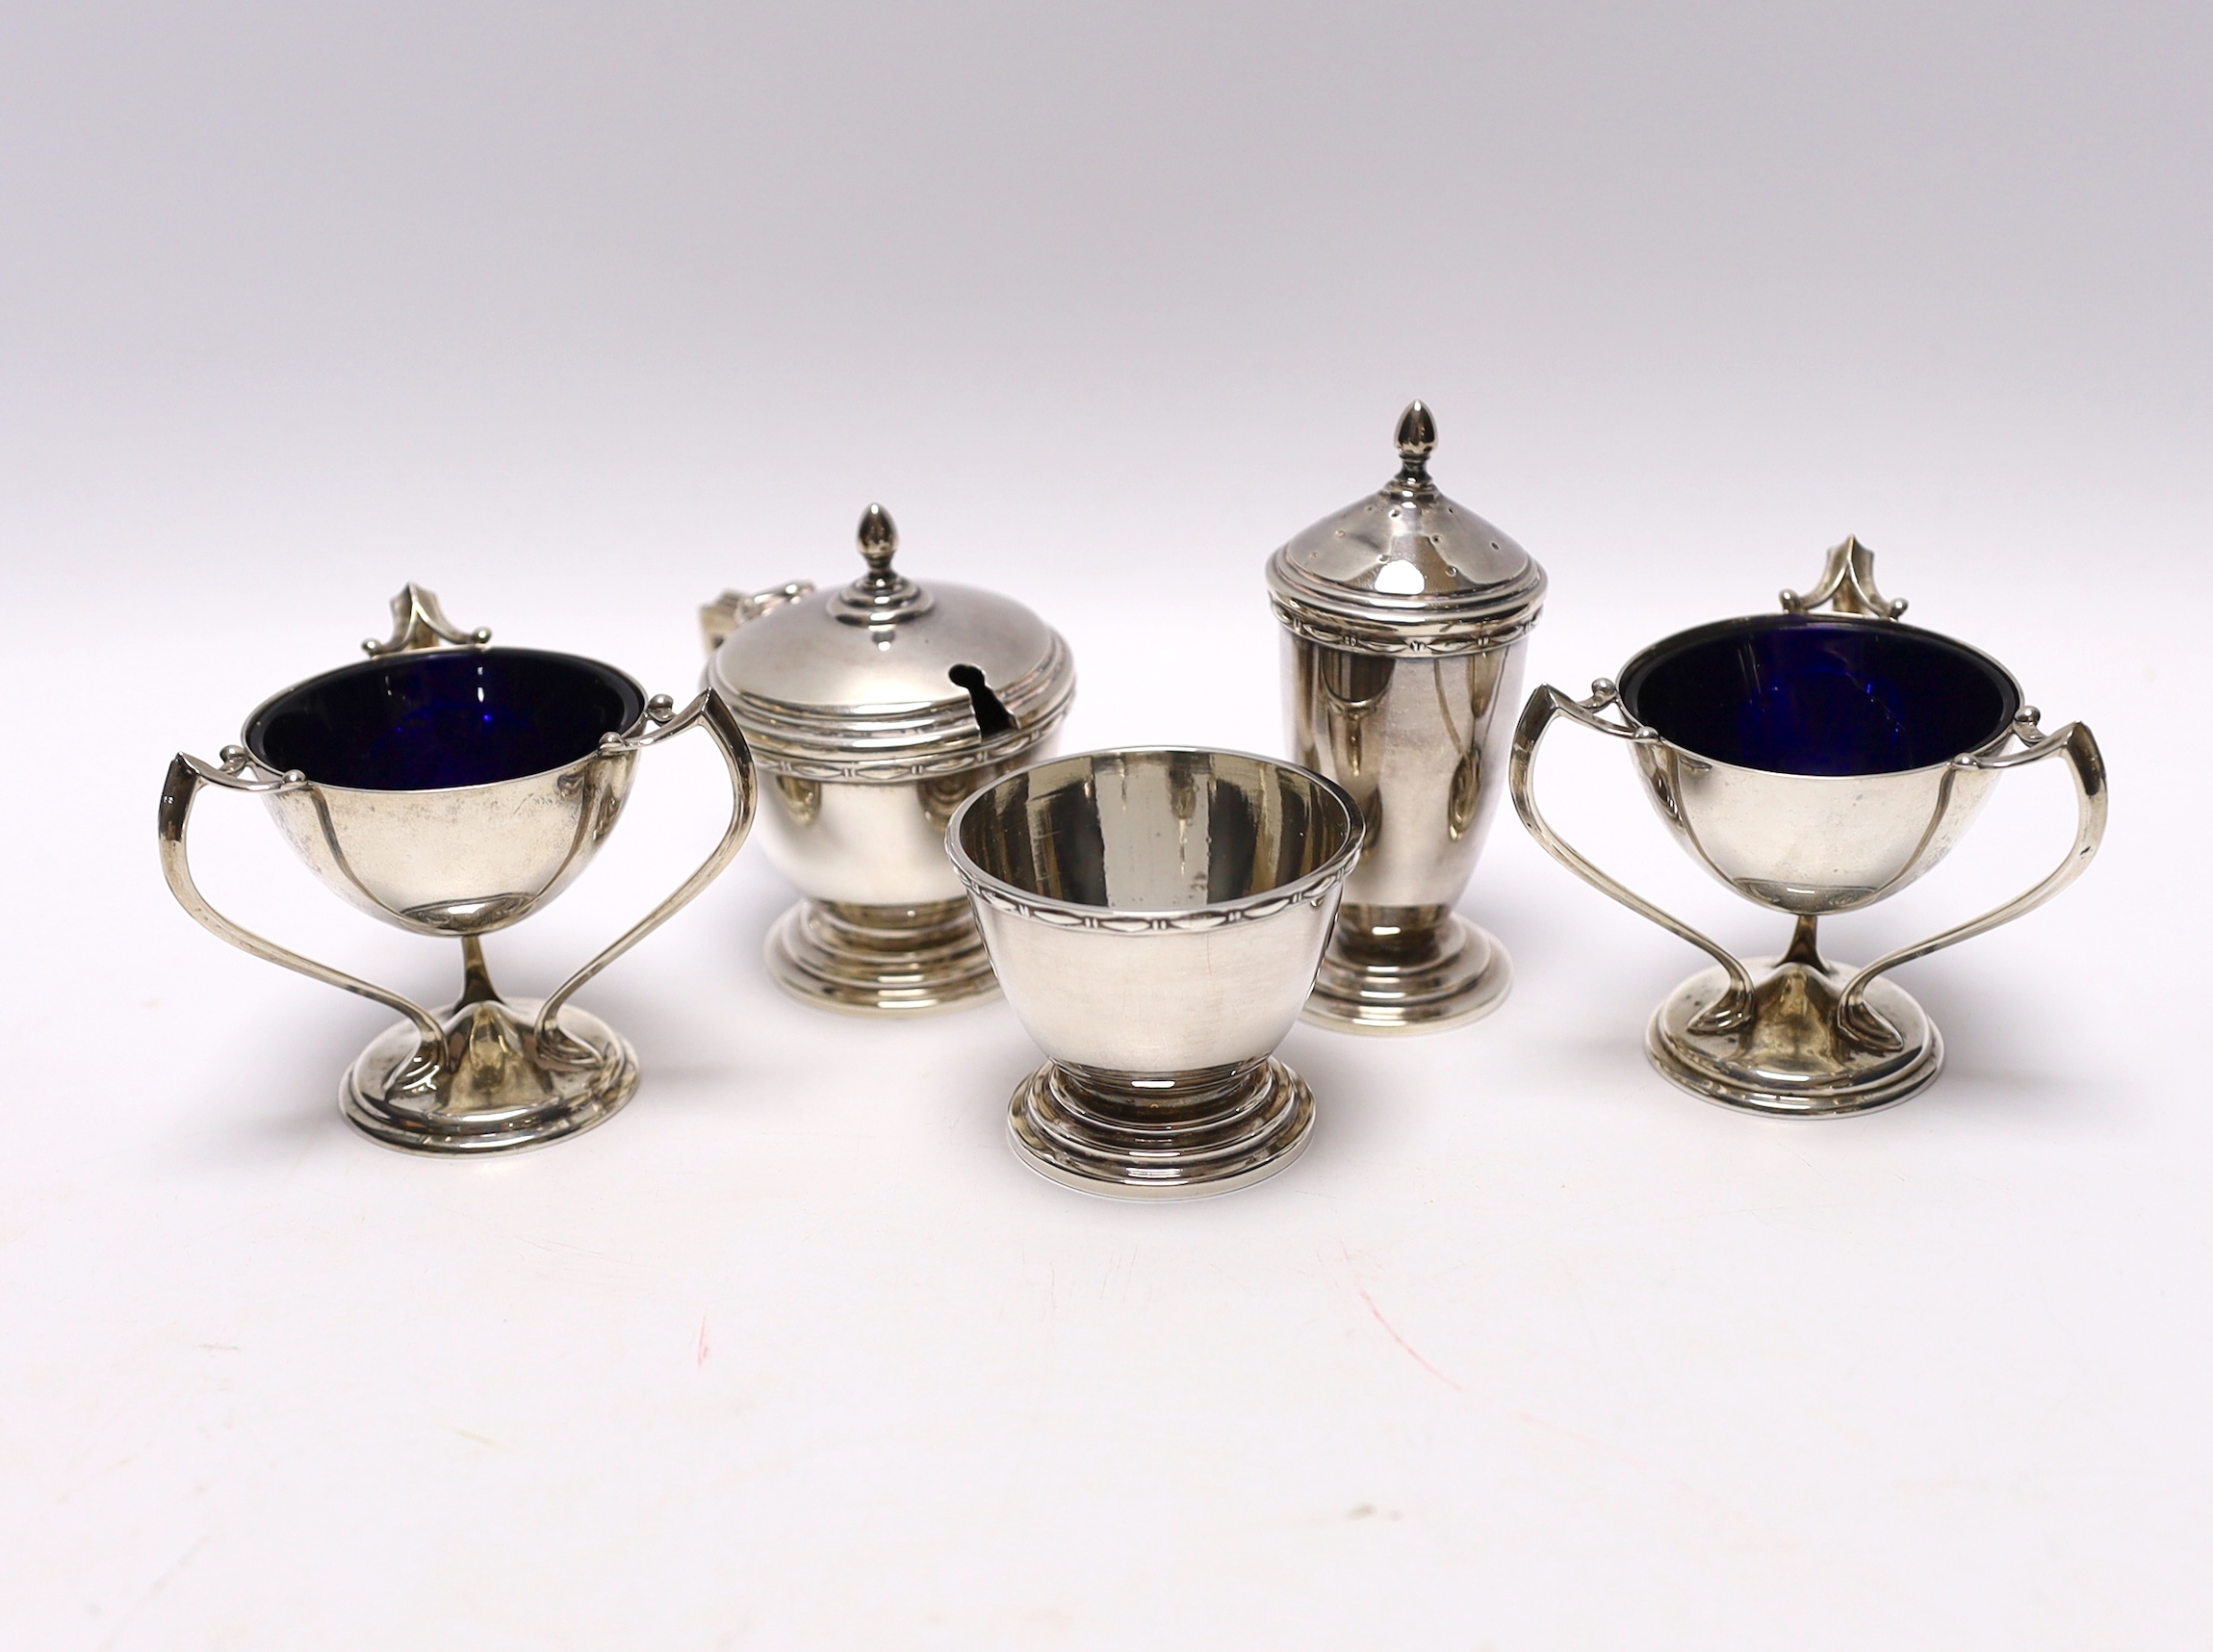 A pair of Edwardian Art Nouveau silver tri-handled salts, Richard Richardson, Sheffield, 1905, height 59mm, together with a later silver three piece condiment set, with two spoons (one plated).